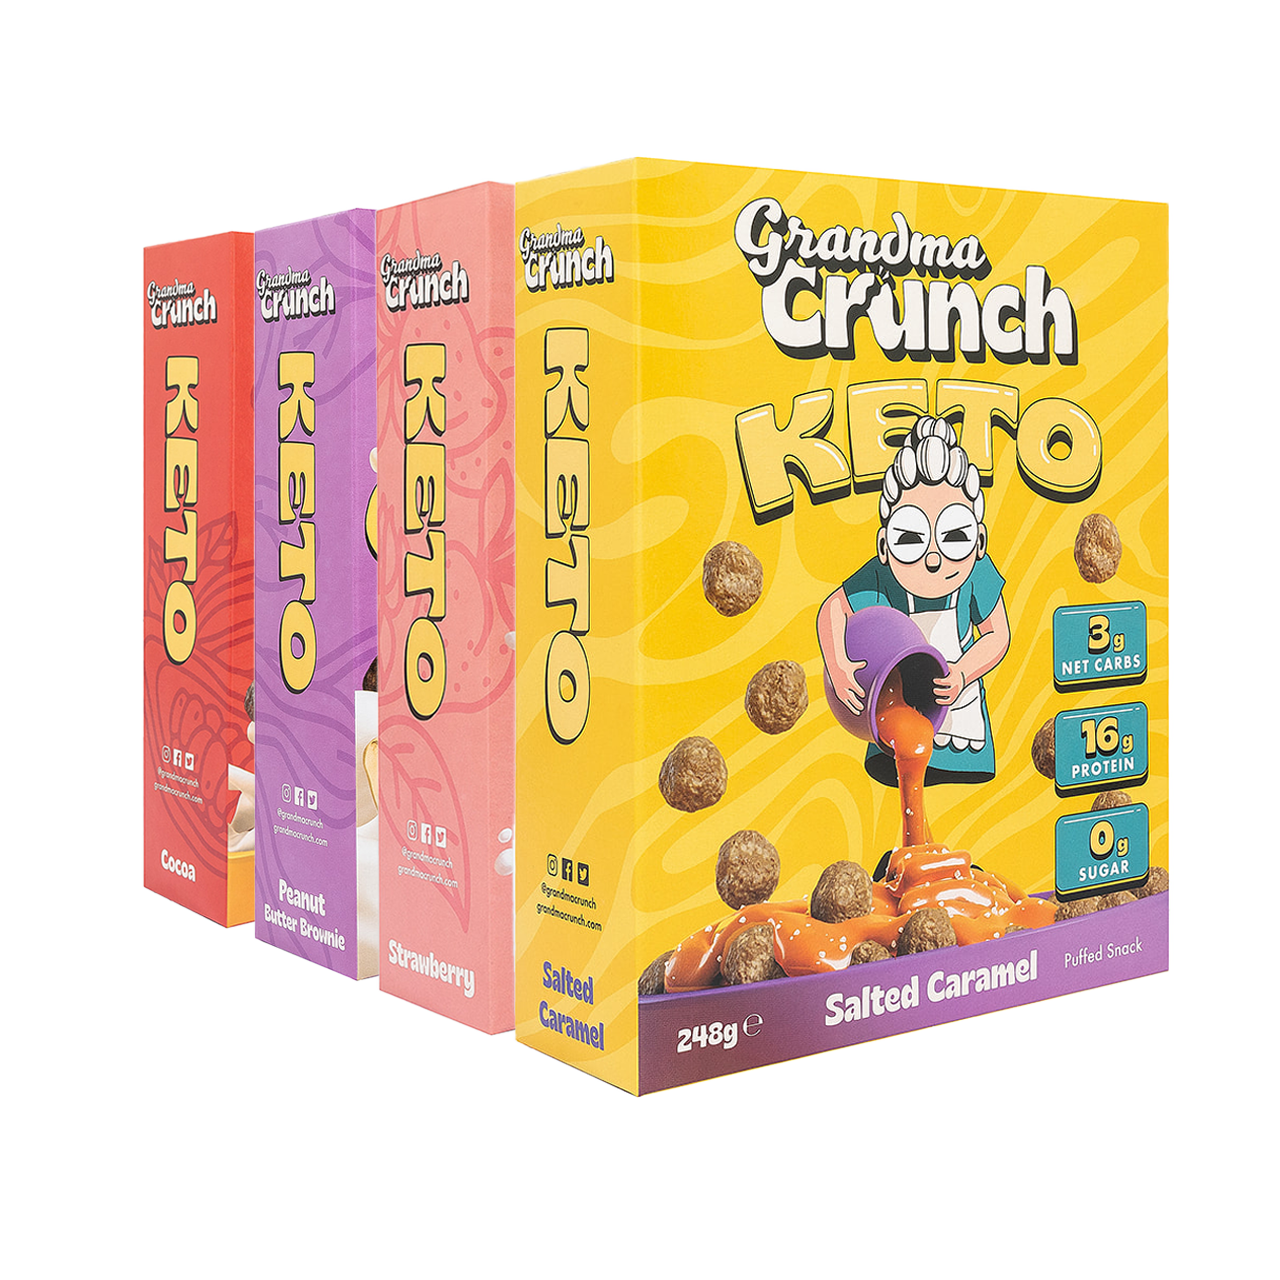 Keto Cereal Variety Pack